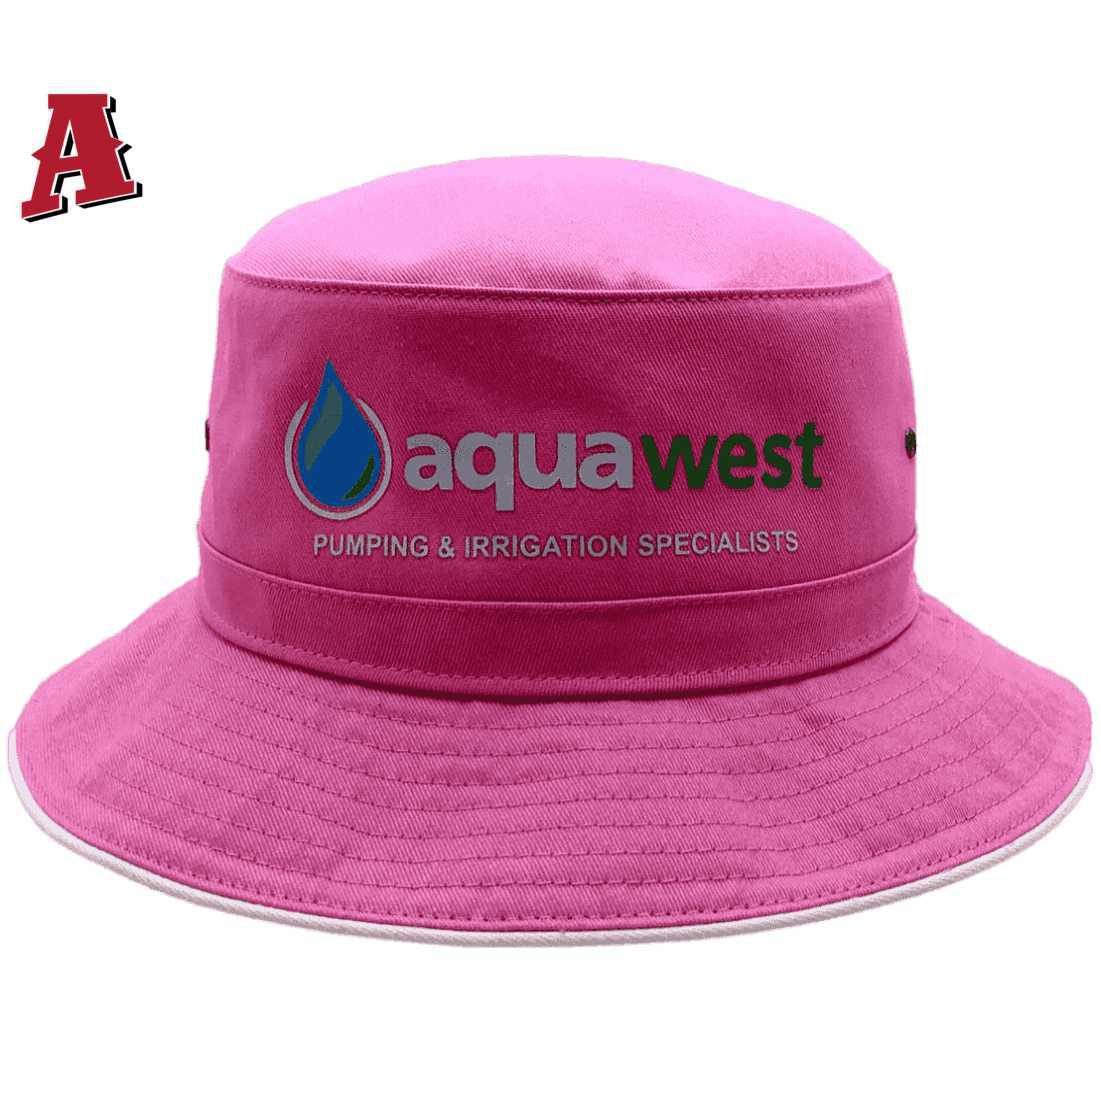 Aquawest Pumping and Irrigation Specialists Dubbo NSW Aussie Bucket Hat, One Size Fits All with Adjustable Toggle Crown